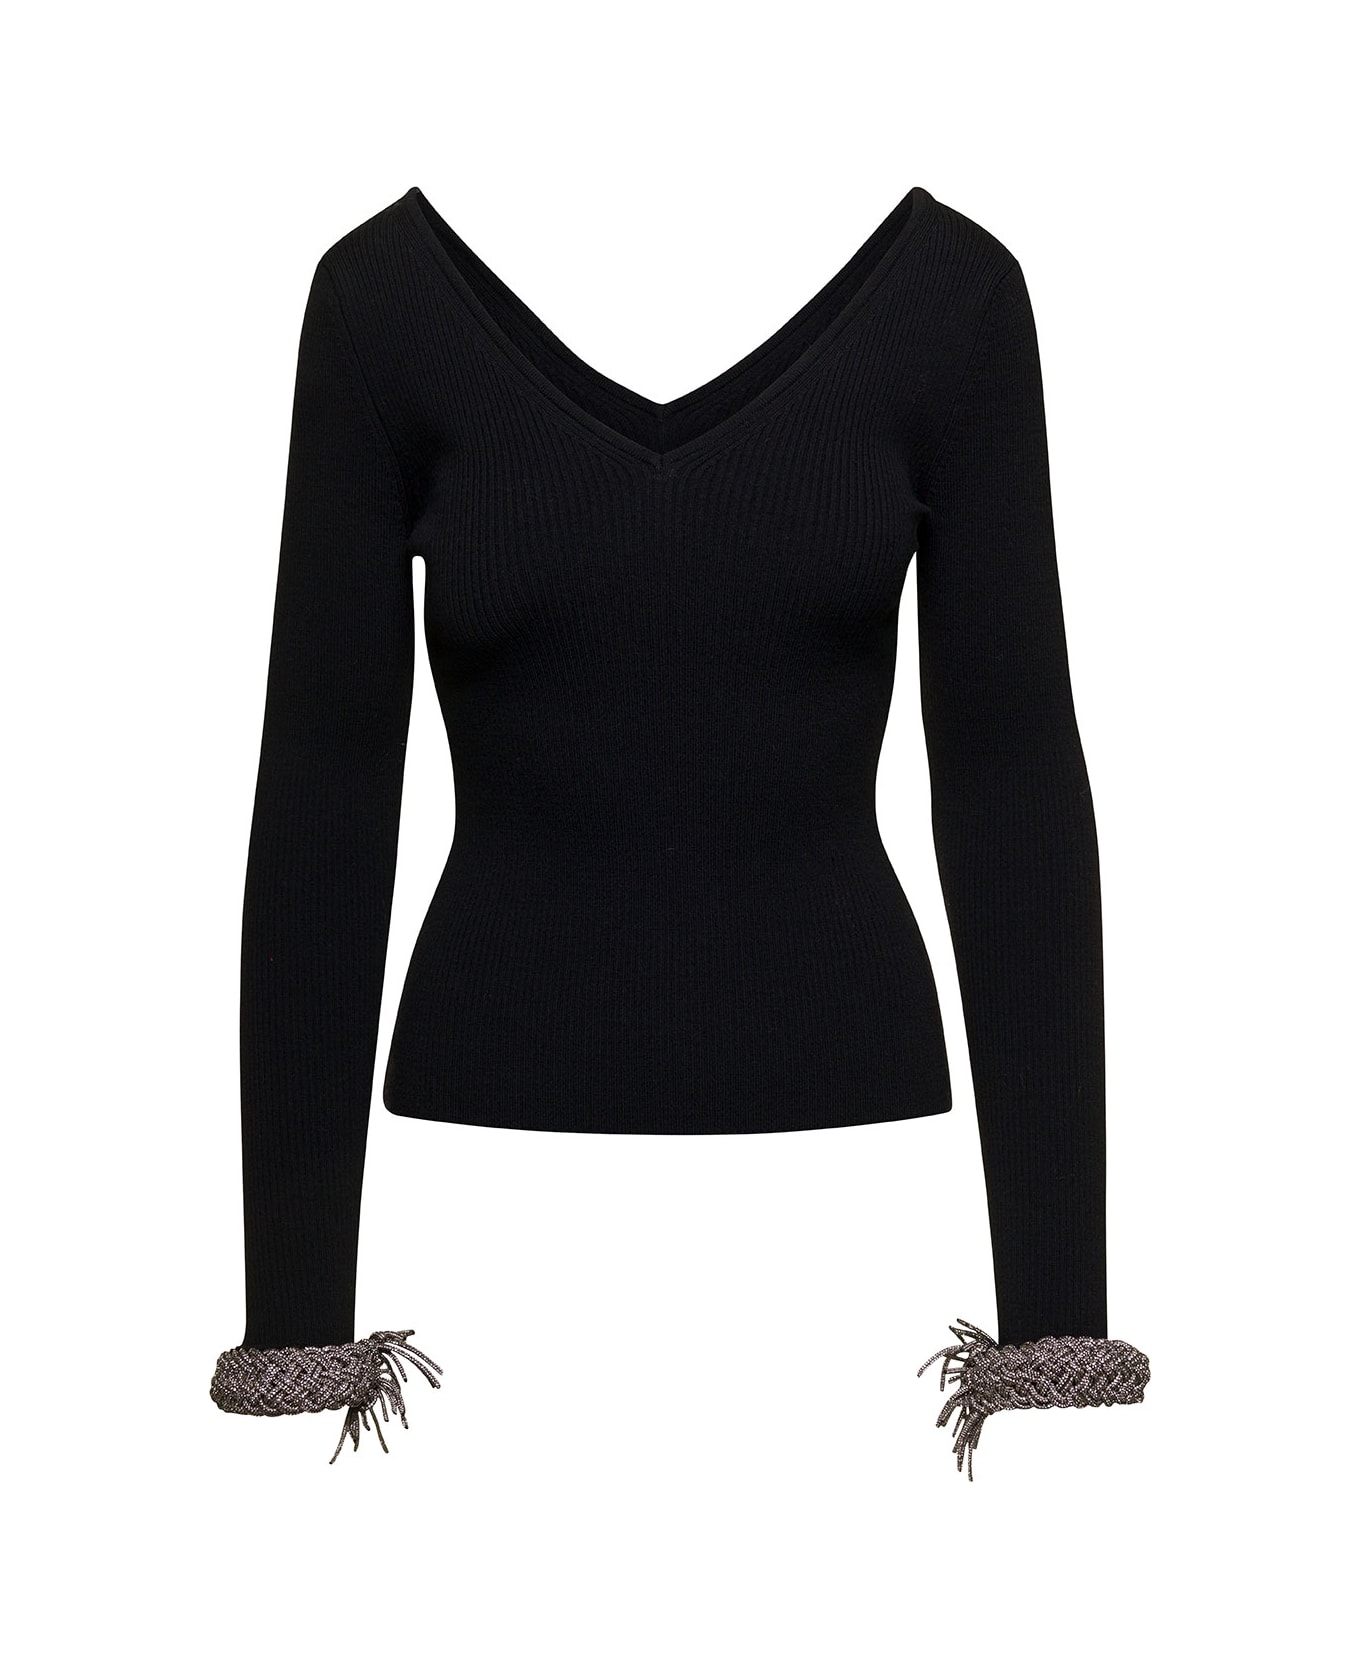 Giuseppe di Morabito Black Top With V Neckline And Embellished Wrist In Wool Blend Woman - Black